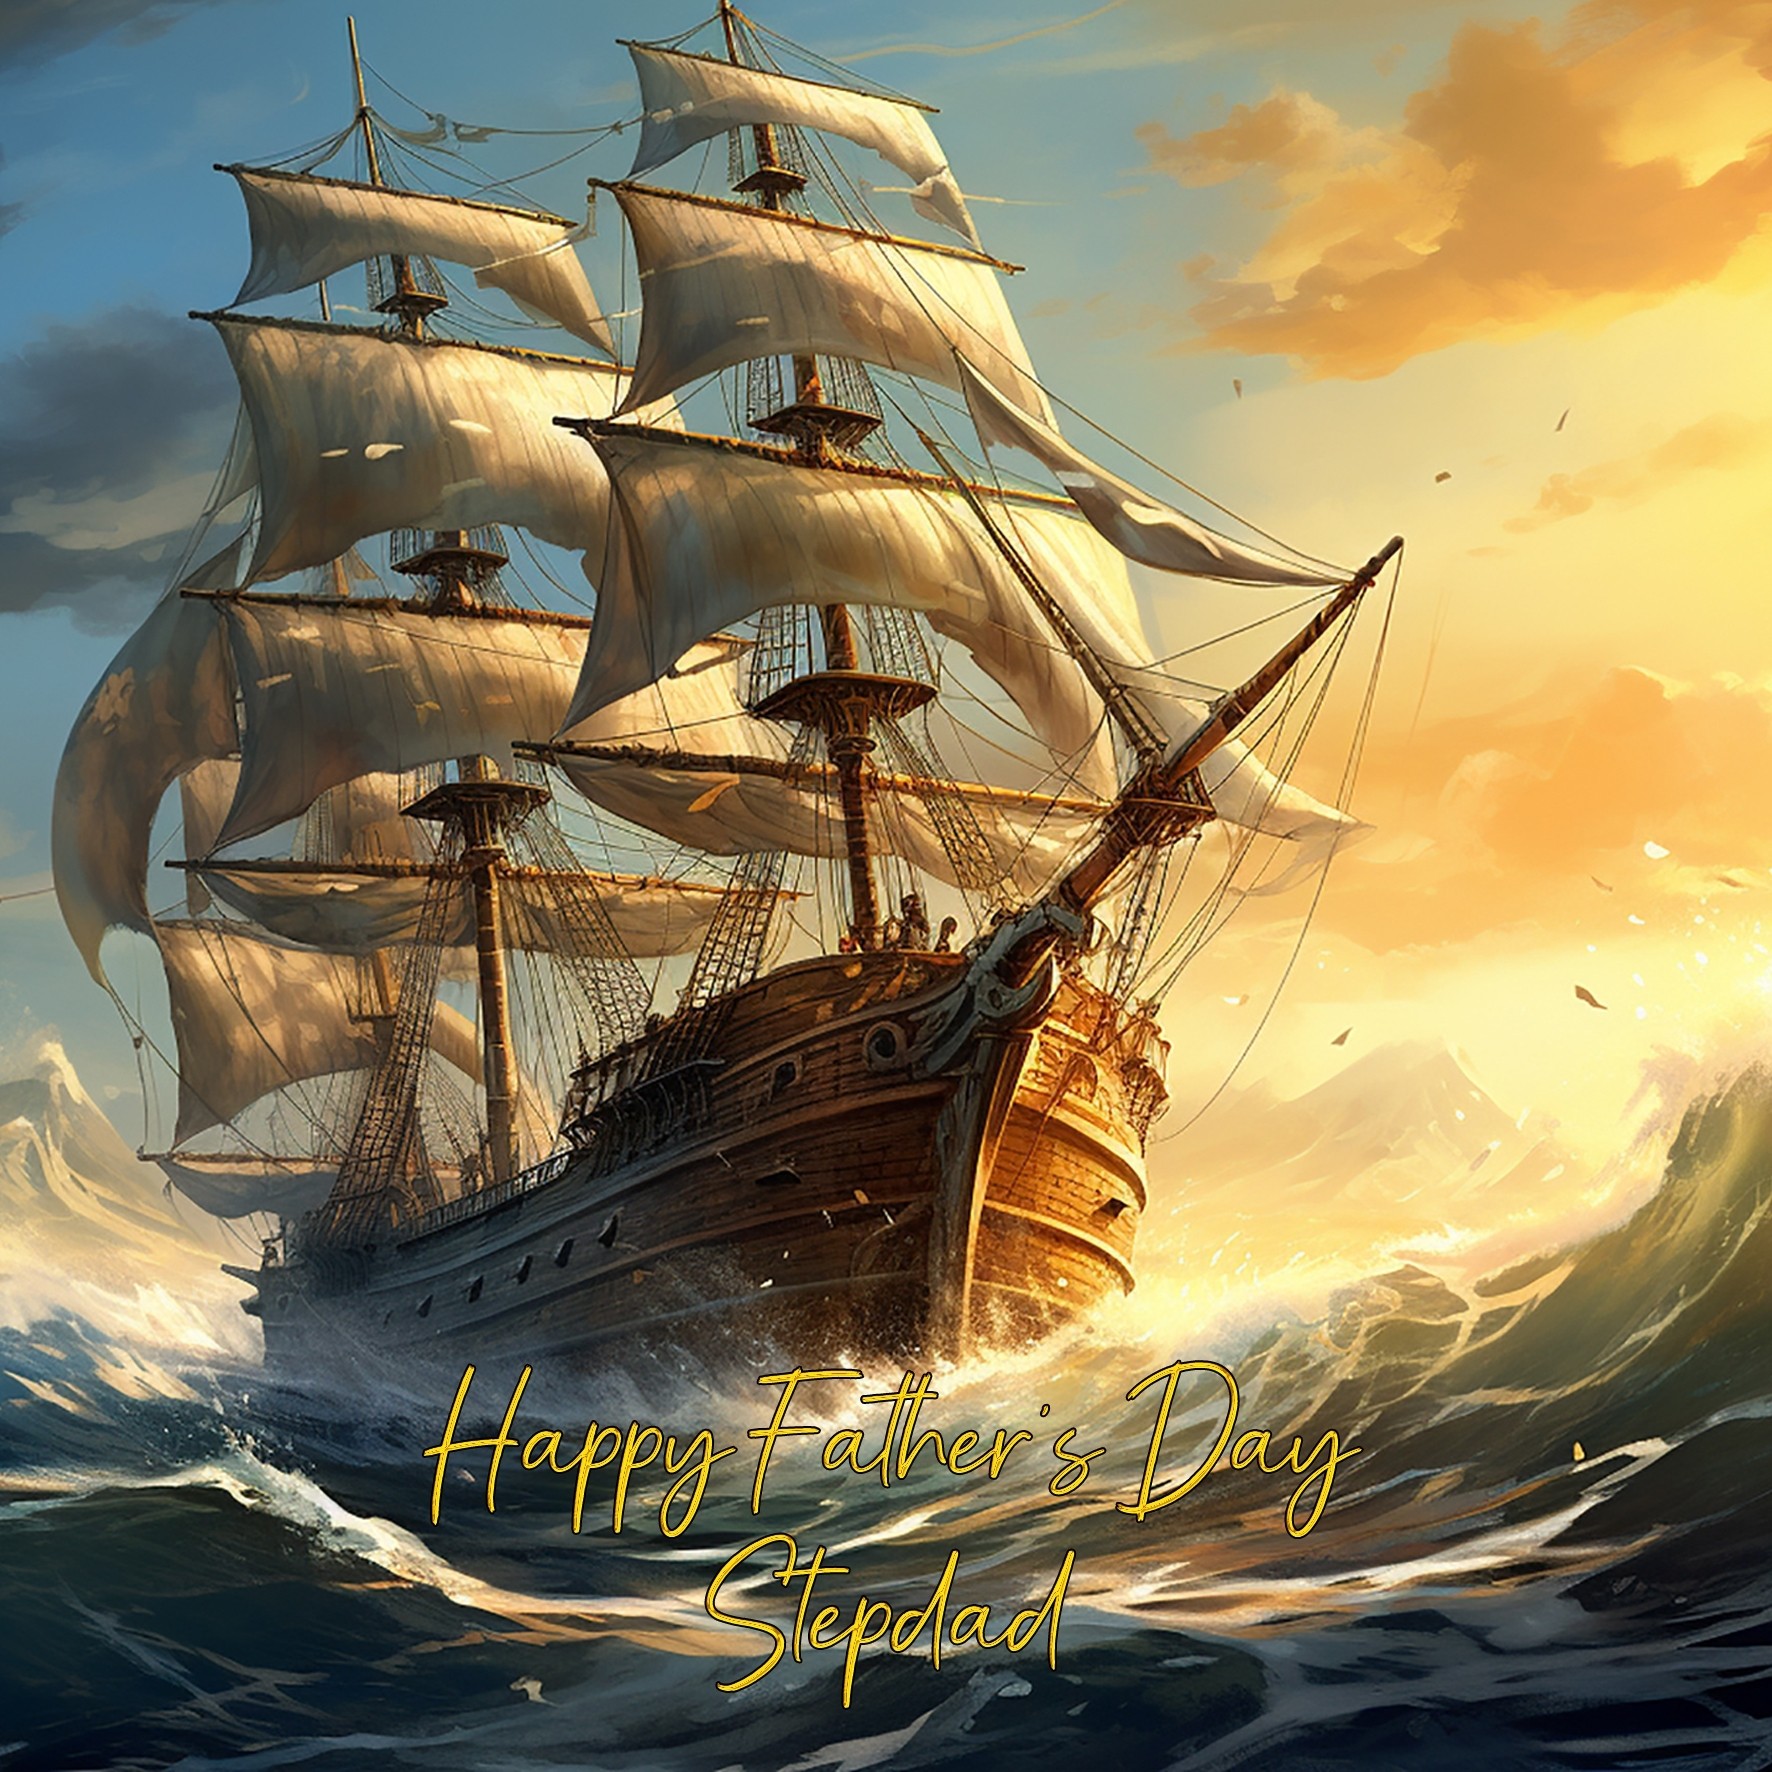 Ship Scenery Art Square Fathers Day Card For Stepdad (Design 4)